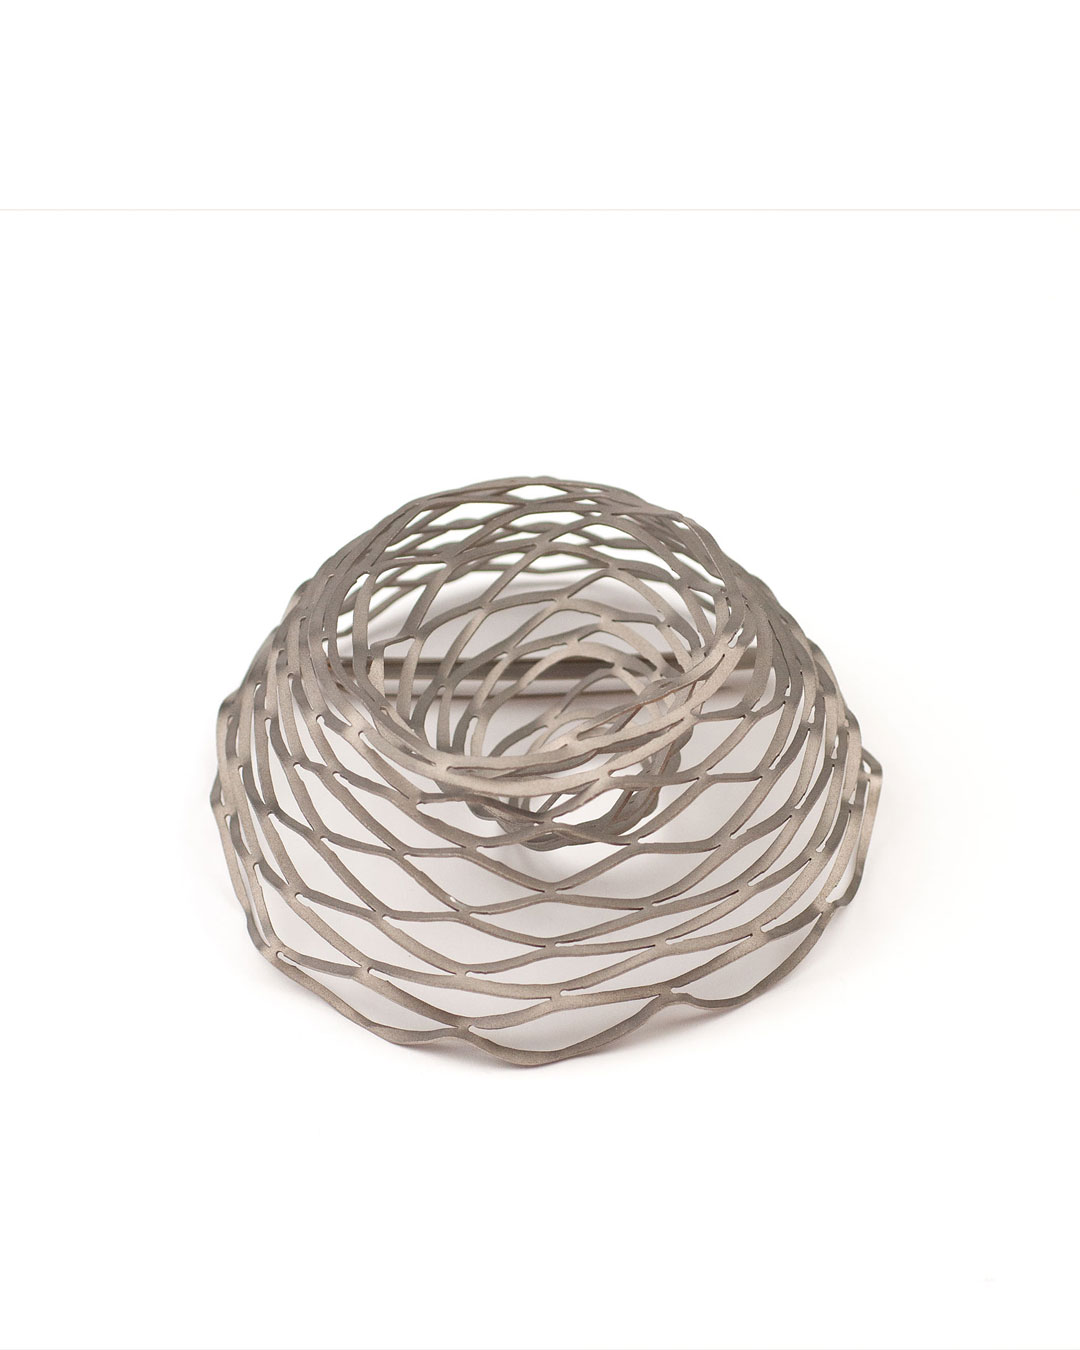 Antje Bräuer, untitled, 2010, brooch; titanium, gold, stainless steel, 116 x 109 x 52 mm, €780